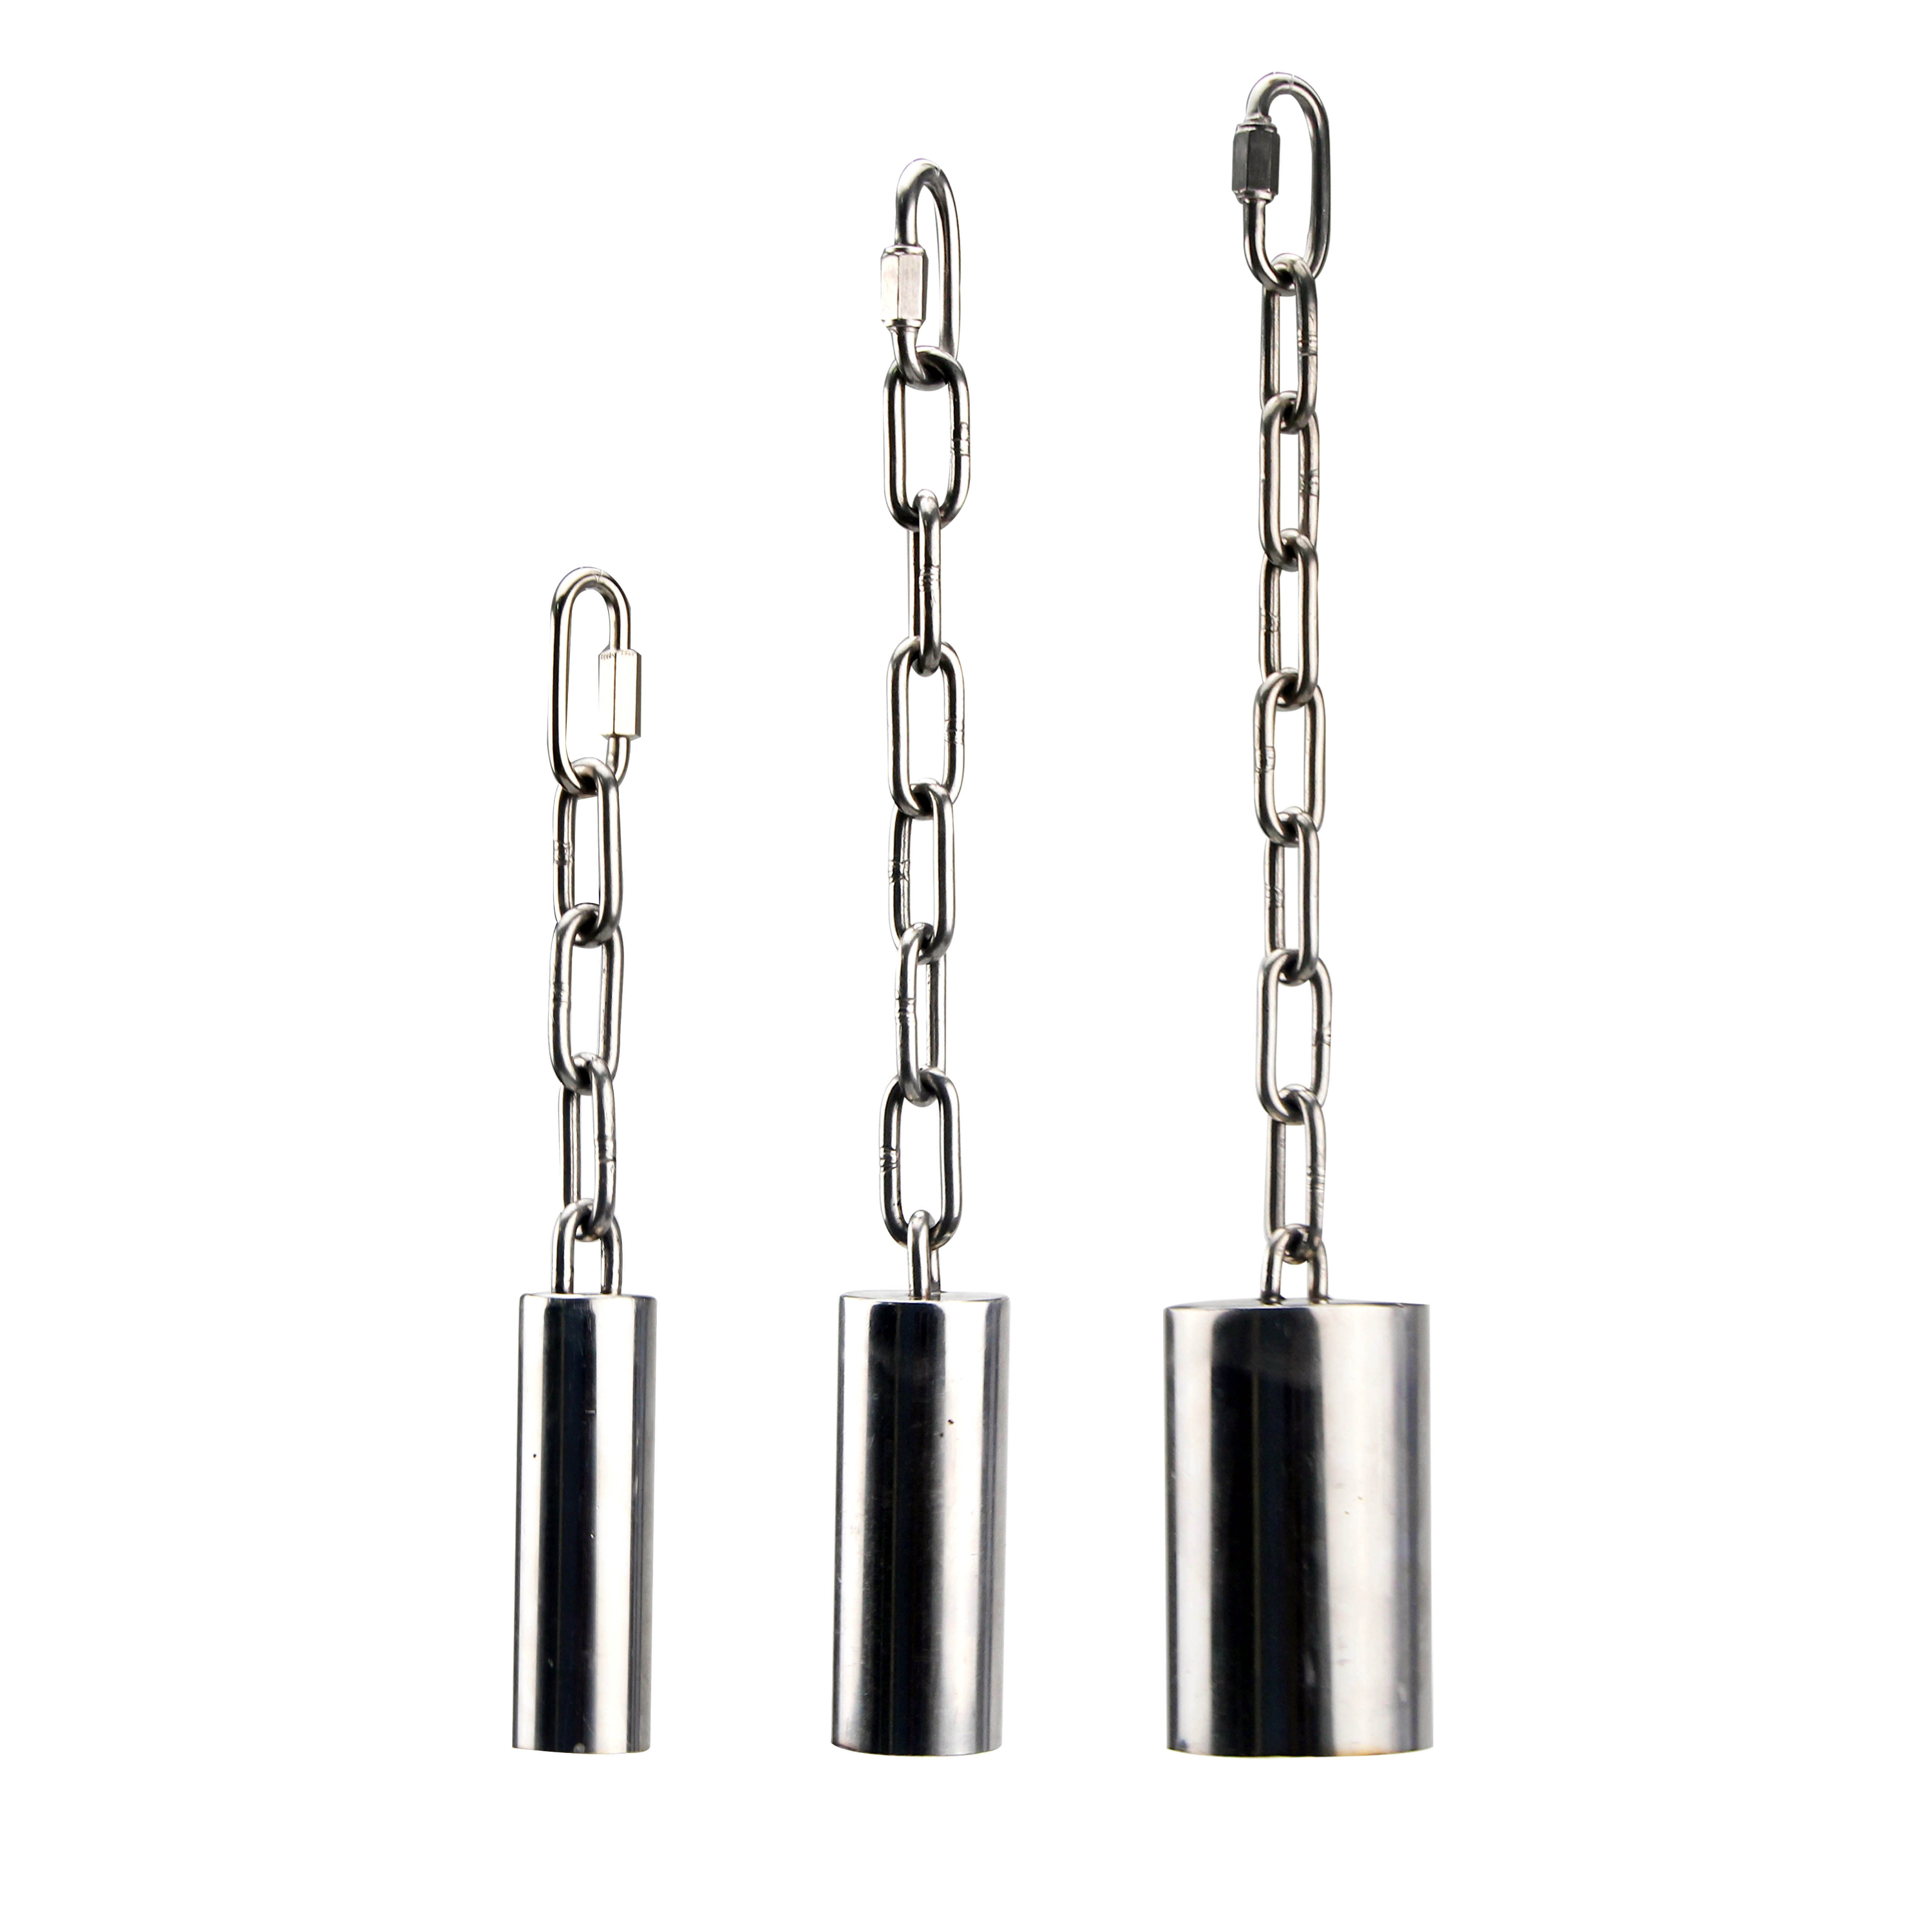 Stainless Steel Tube Bells - 3 Sizes to Choose From!